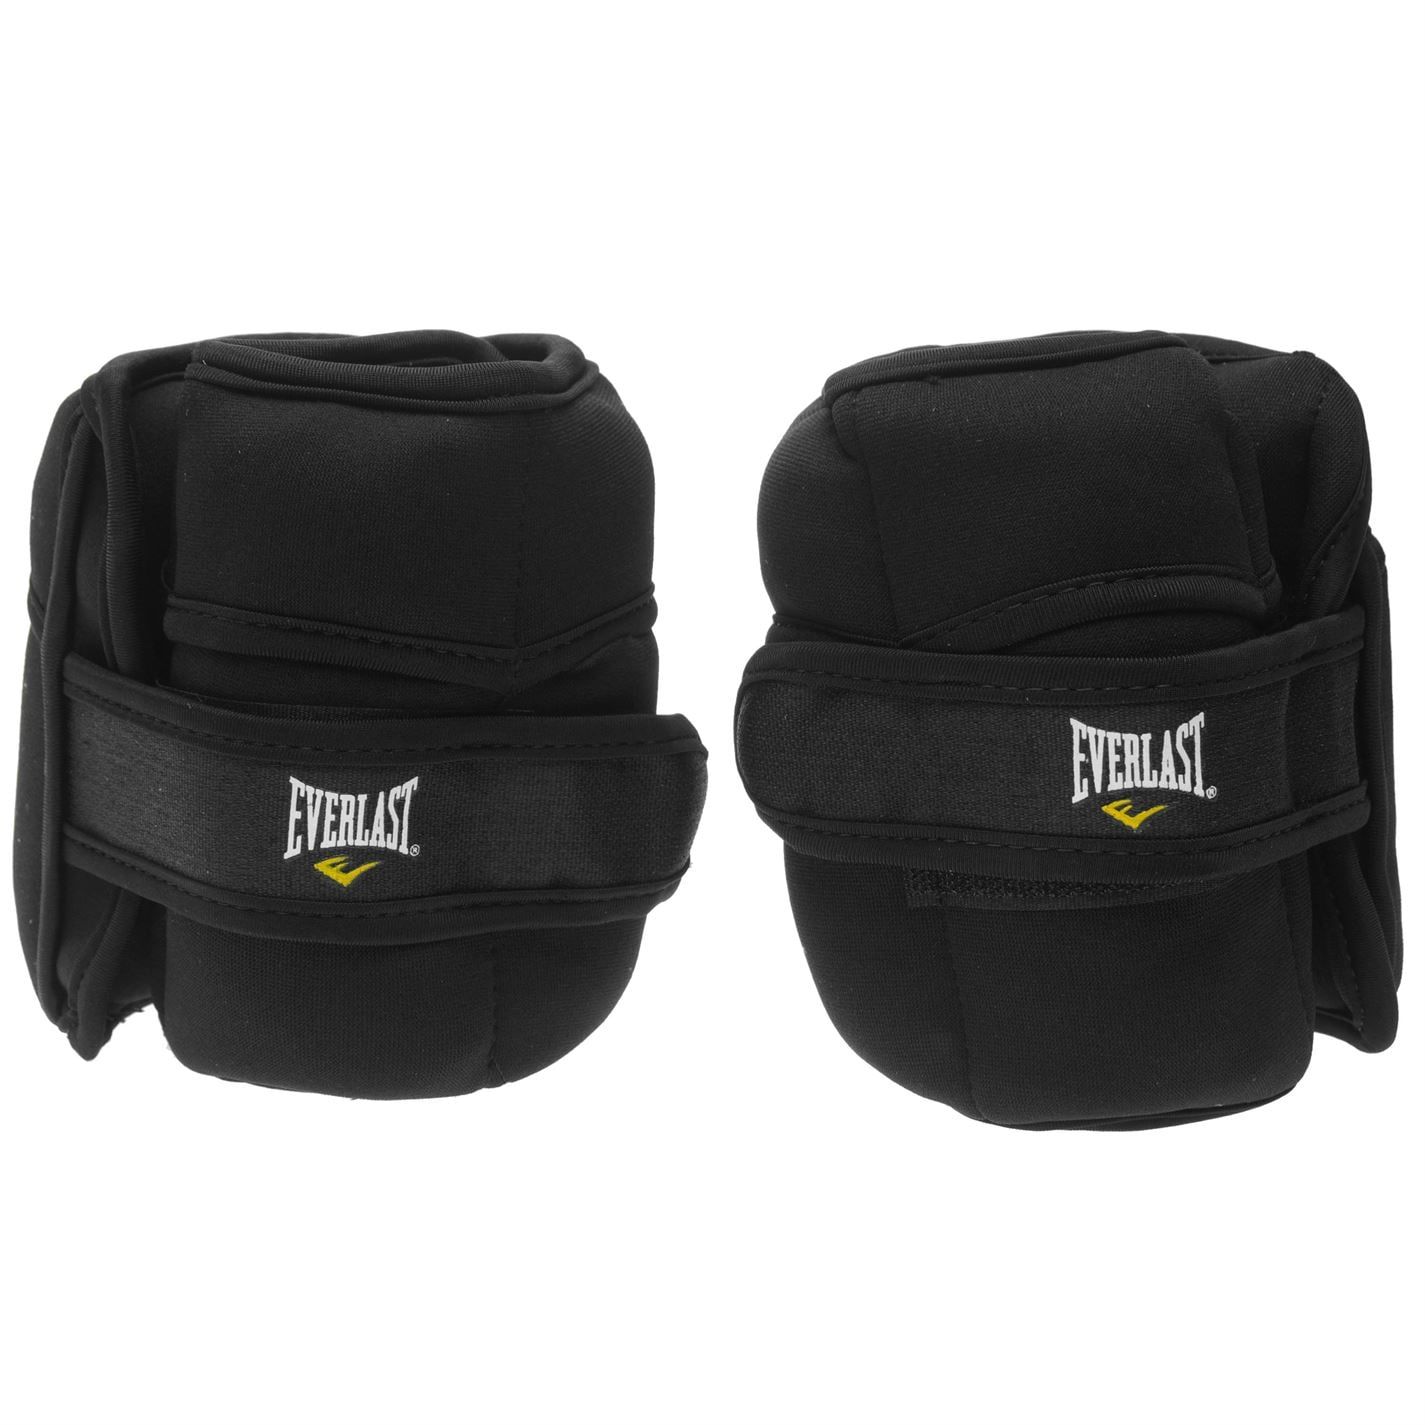 <strong>Everlast 4kg Ankle / Wrist Weights</strong><br> 
The Everlast Ankle and Wrist Weights are ideal for helping to strengthen and tone the muscles in your arms and legs, featuring a comfort design with a touch and close fastening for a secure feeling fit while also working with your natural movement, completed with the Everlast branding to the sides. 

<br><br>> Ankle and wrist weights
<br>> Comfort design 
<br>> Touch and close fastening strap 
<br>> Strengthens and tones 
<br>> 2kg per weight 
<br>> Works with your natural movement 
<br>> Everlast branding